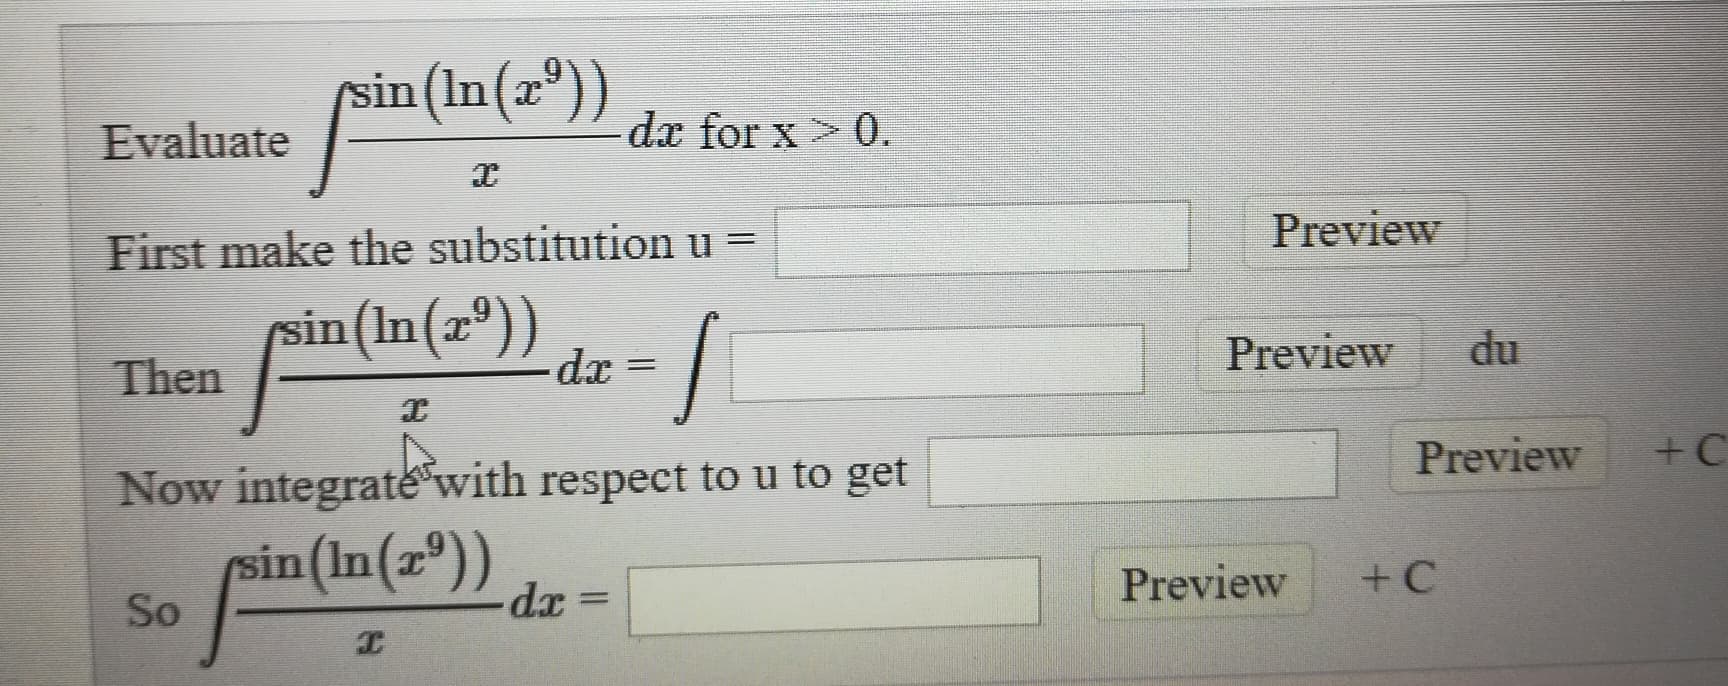 sin(In(2°))
Evaluate
da for x> 0.
Preview
First make the substitution u =
sin(In(x))
dx =
Preview
du
Then
Preview
+C
Now integratewith respect to u to get
sin(In(x°))
So
dx%3D
Preview
